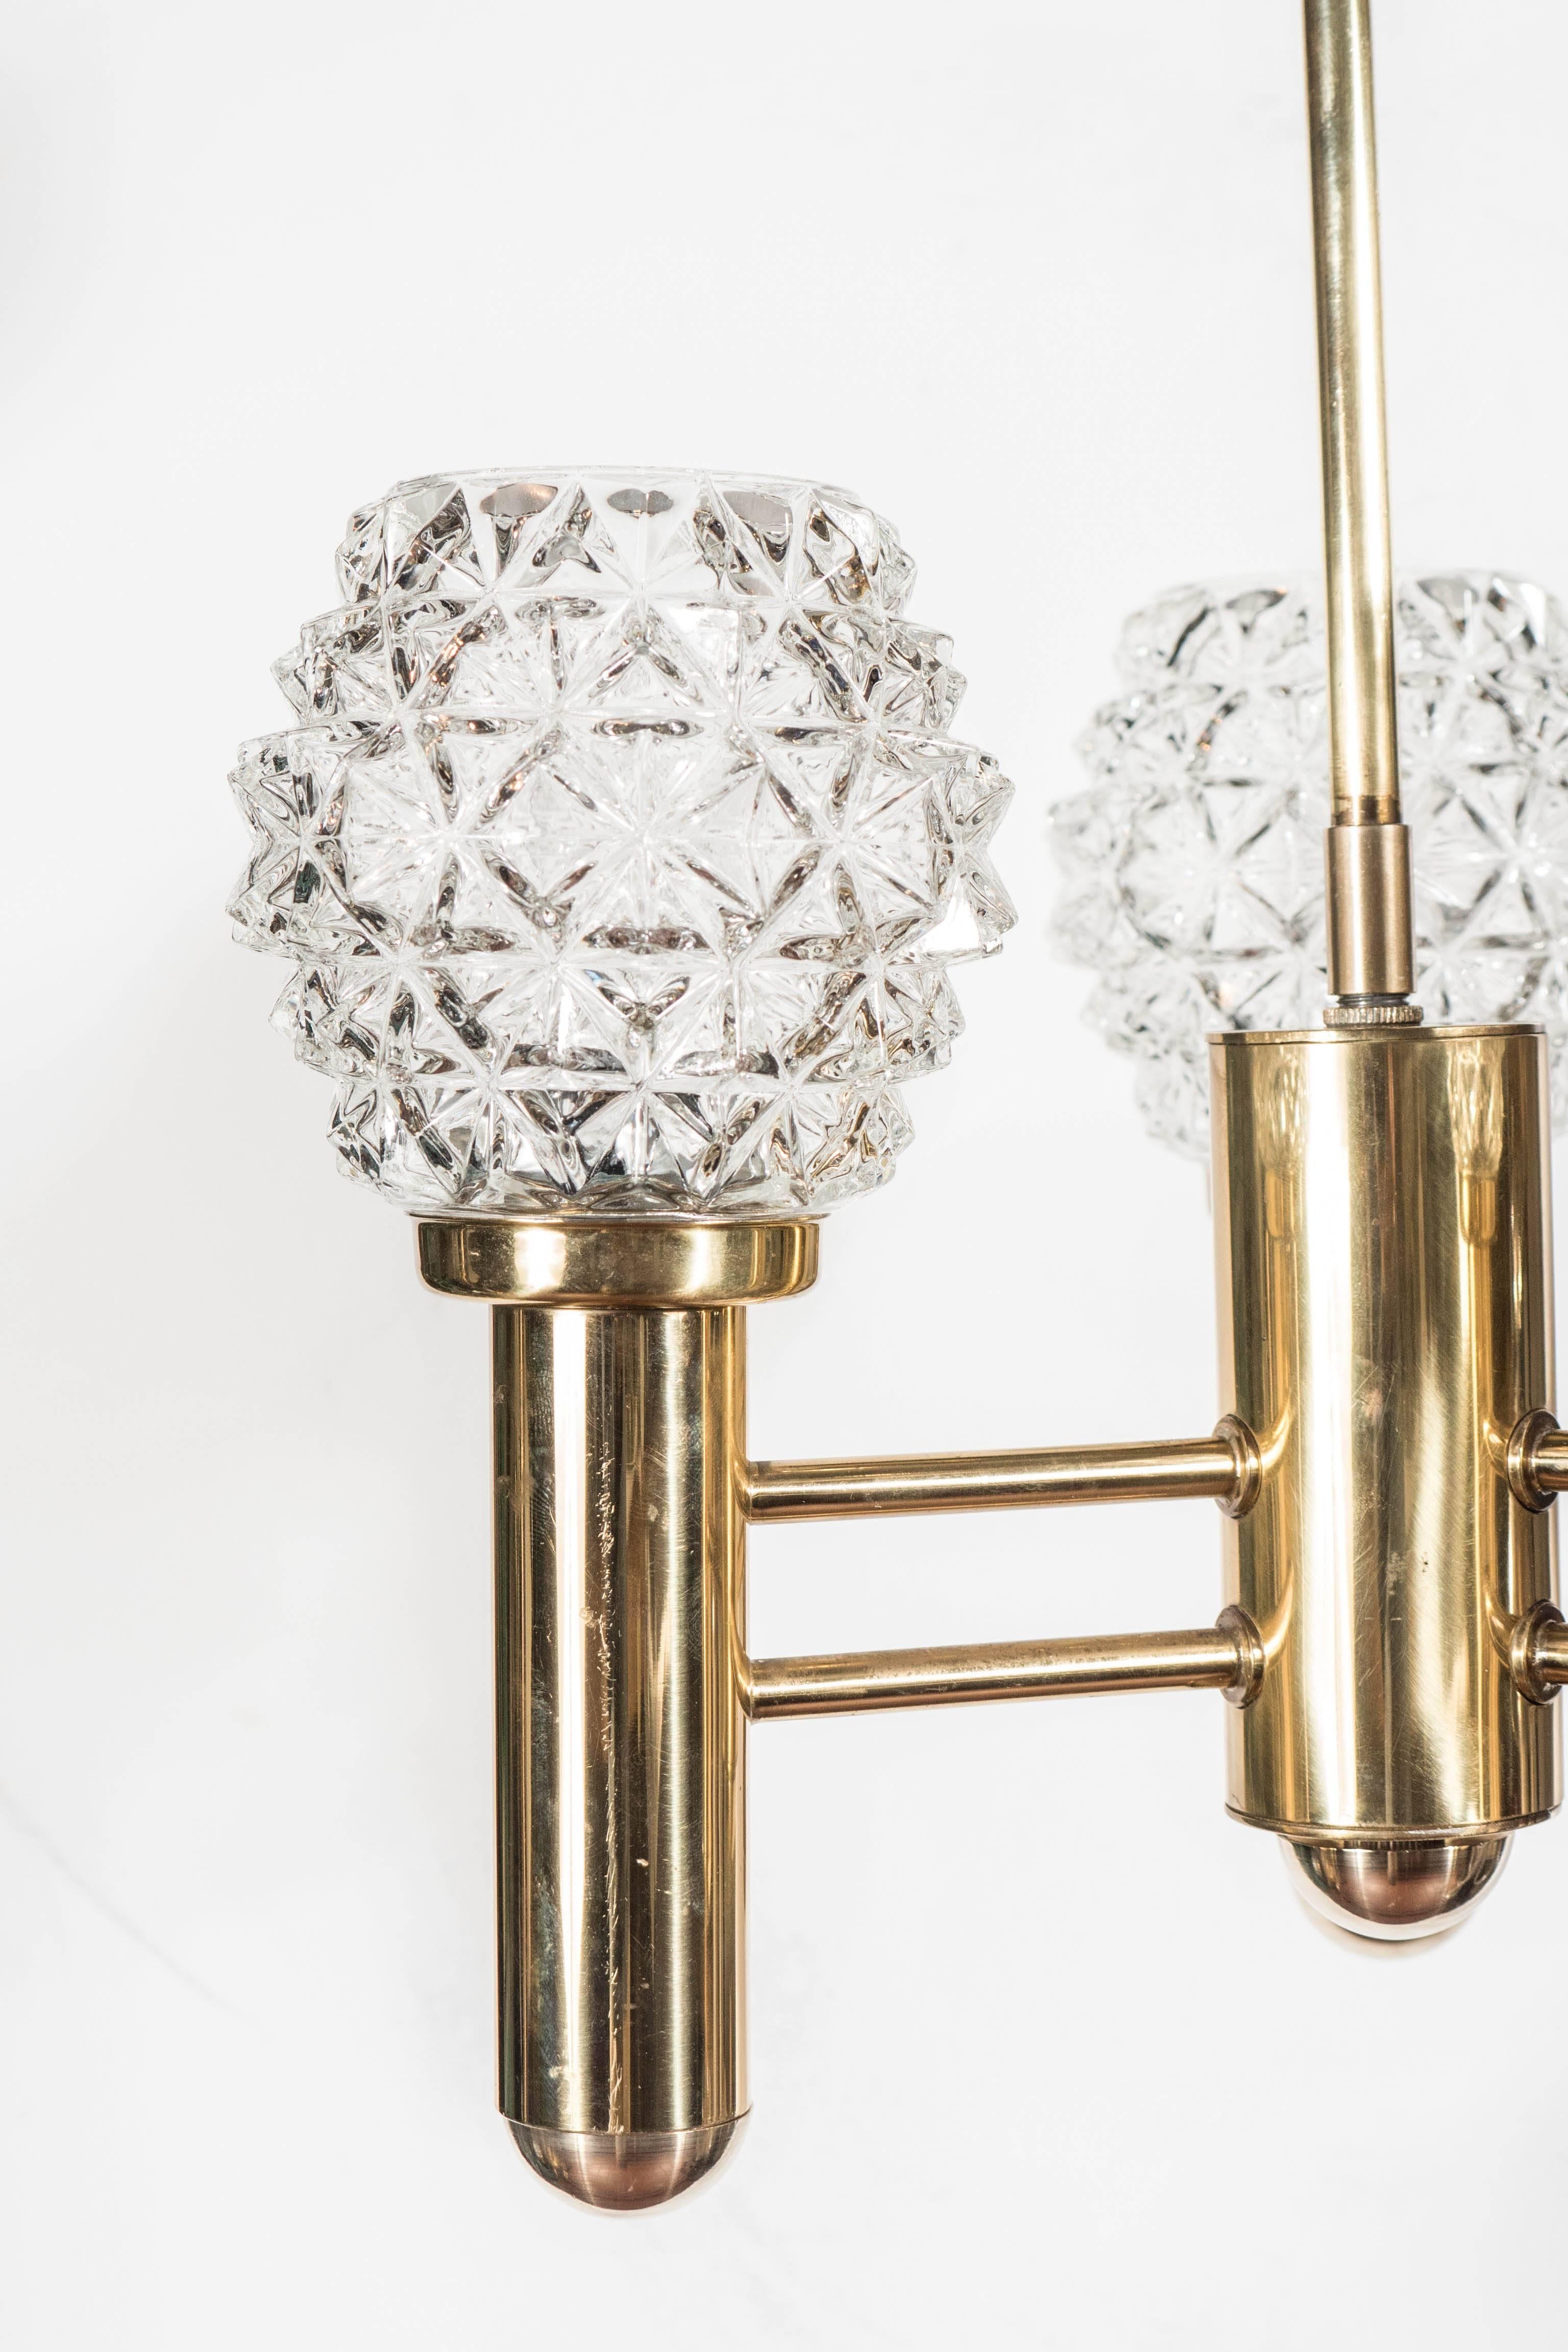 An exquisite Mid-Century Modernist three-arm chandelier in polished brass with multi-faceted crystal shades by Richard Essig. A rounded edge frame complements a set of three sparkling multi-faceted crystal shades. A perfect balance of Mid-Century